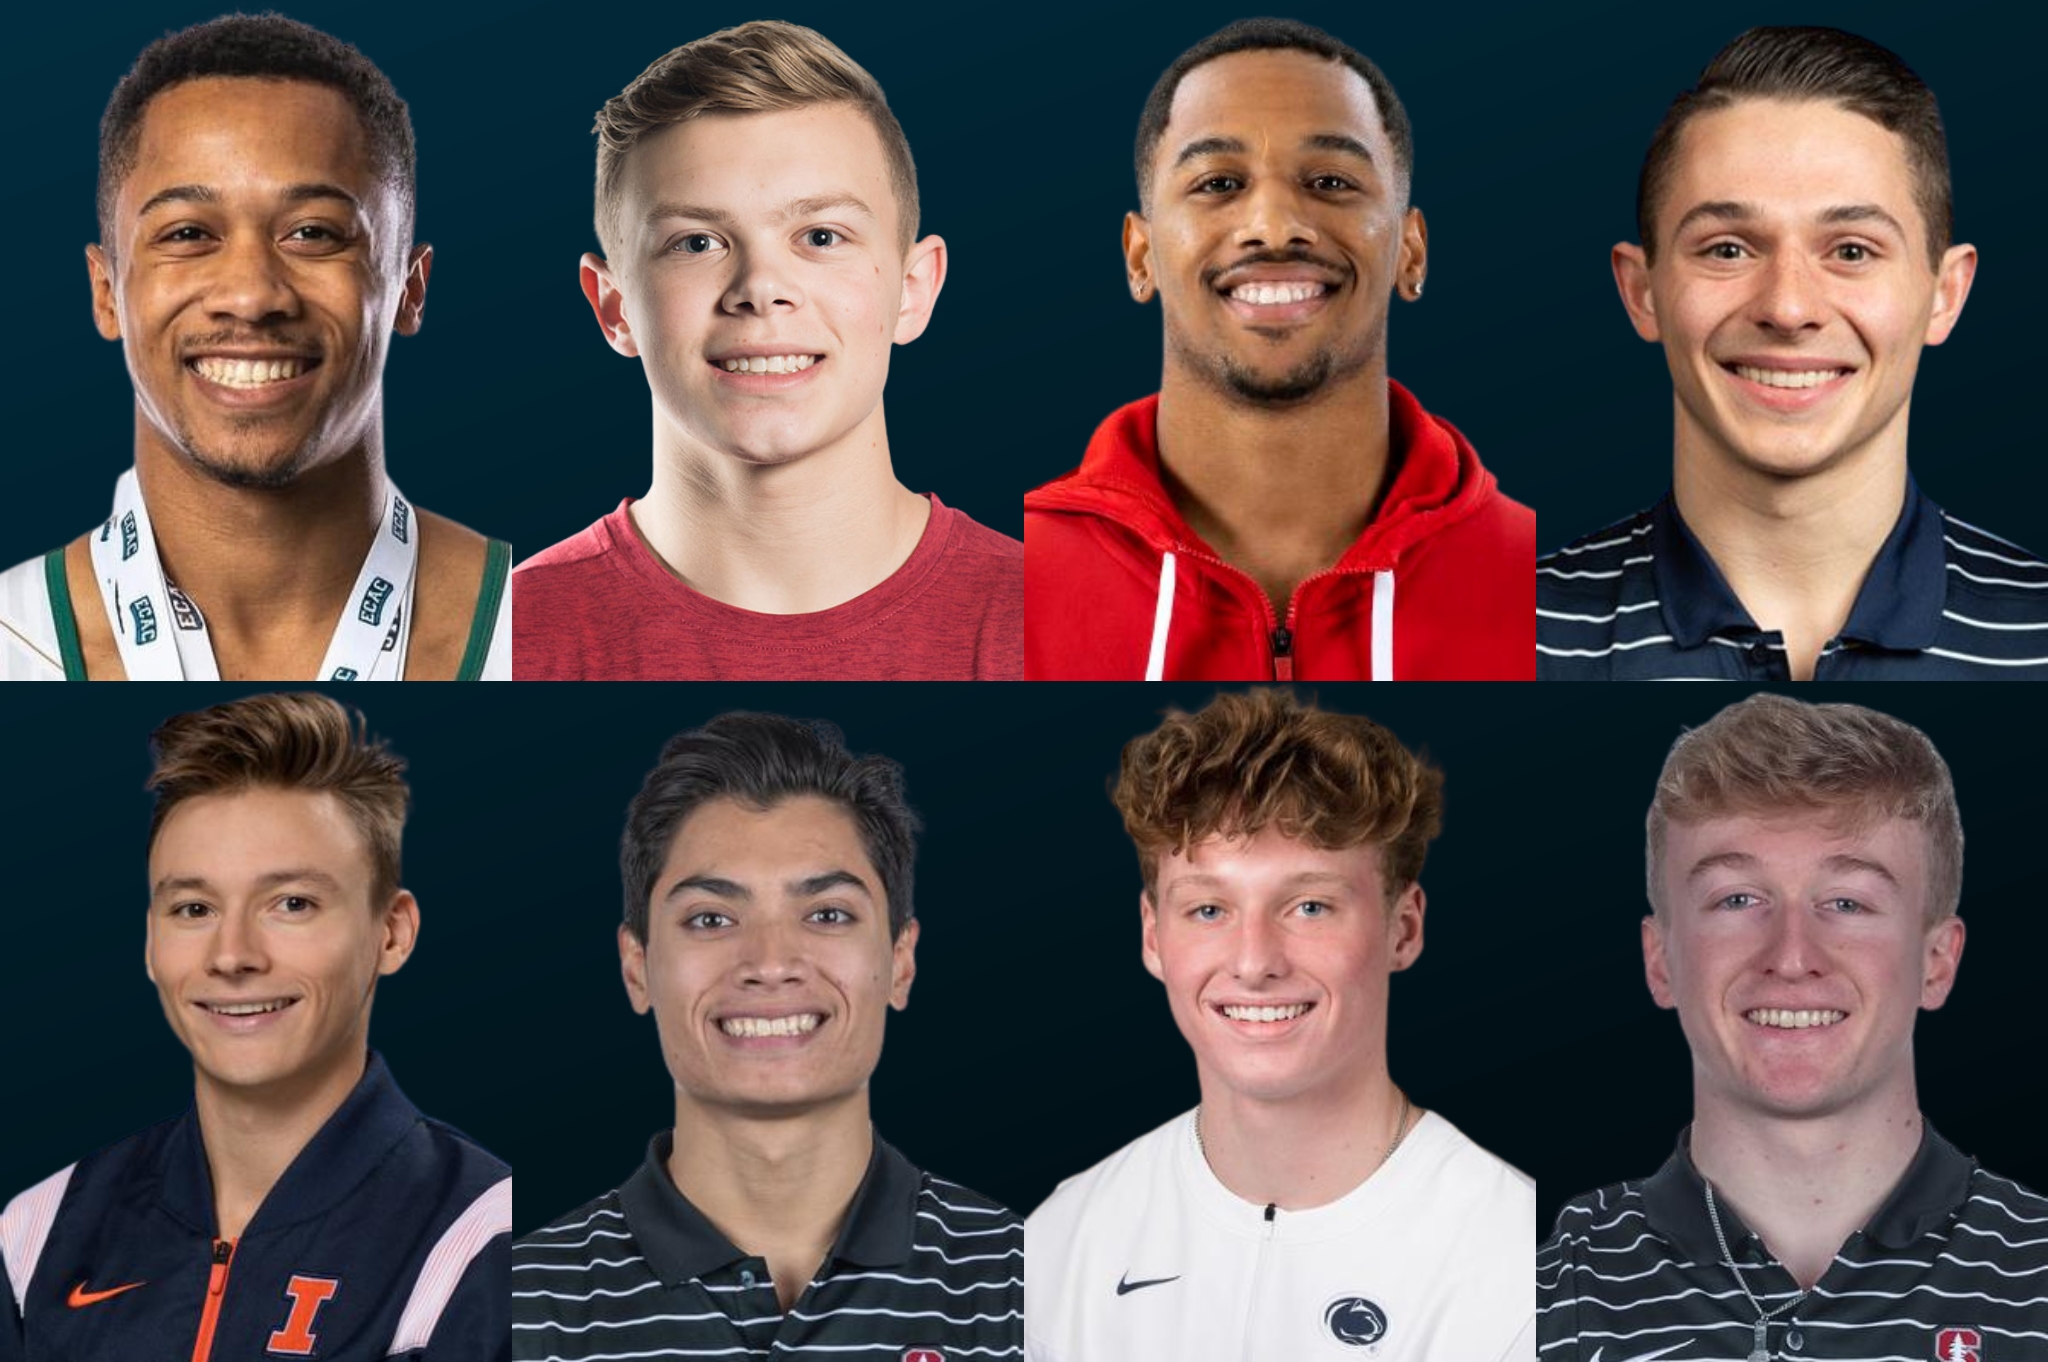 The 2023 Nissen-Emery Award finalists are (top - left to right) Christian Marsh, Spencer Goodell, Donte McKinney, Paul Juda, (bottom - left to right) Ian Skirkey, Brandon Briones, Chase Clingman, and Riley Loos.